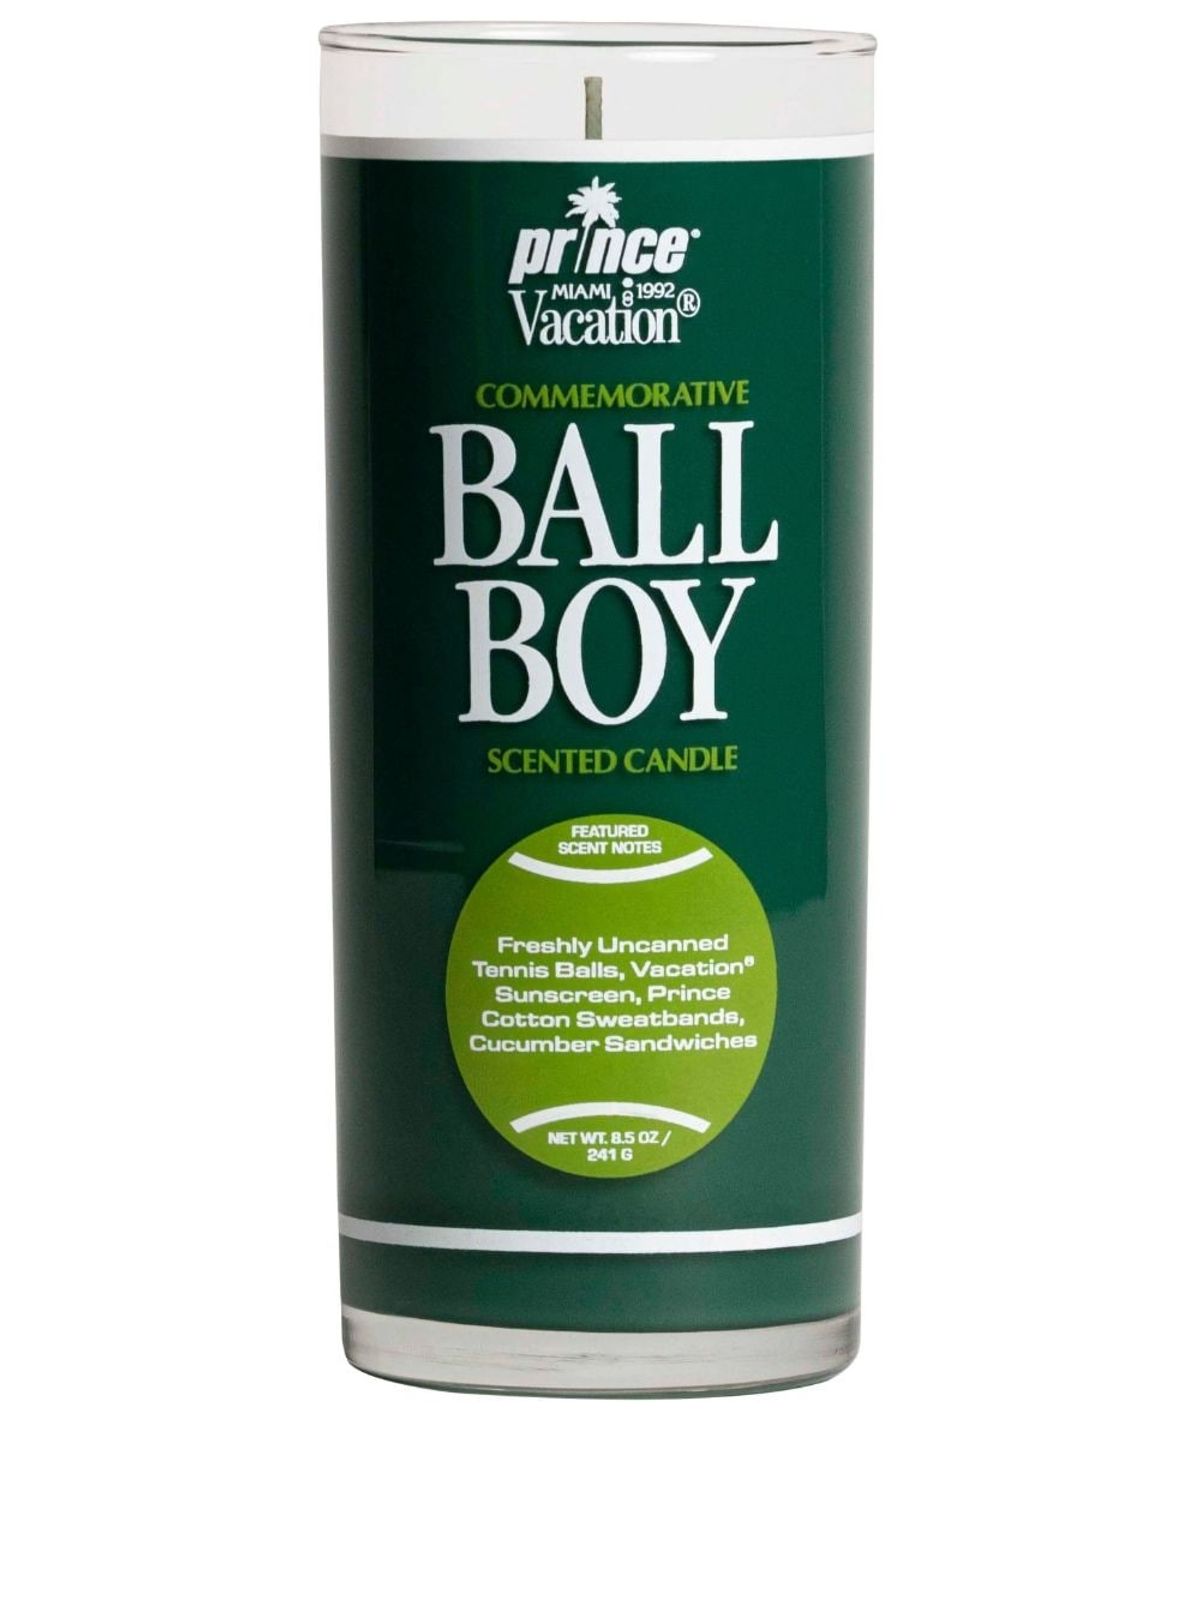 Ball Boy Scented Candle